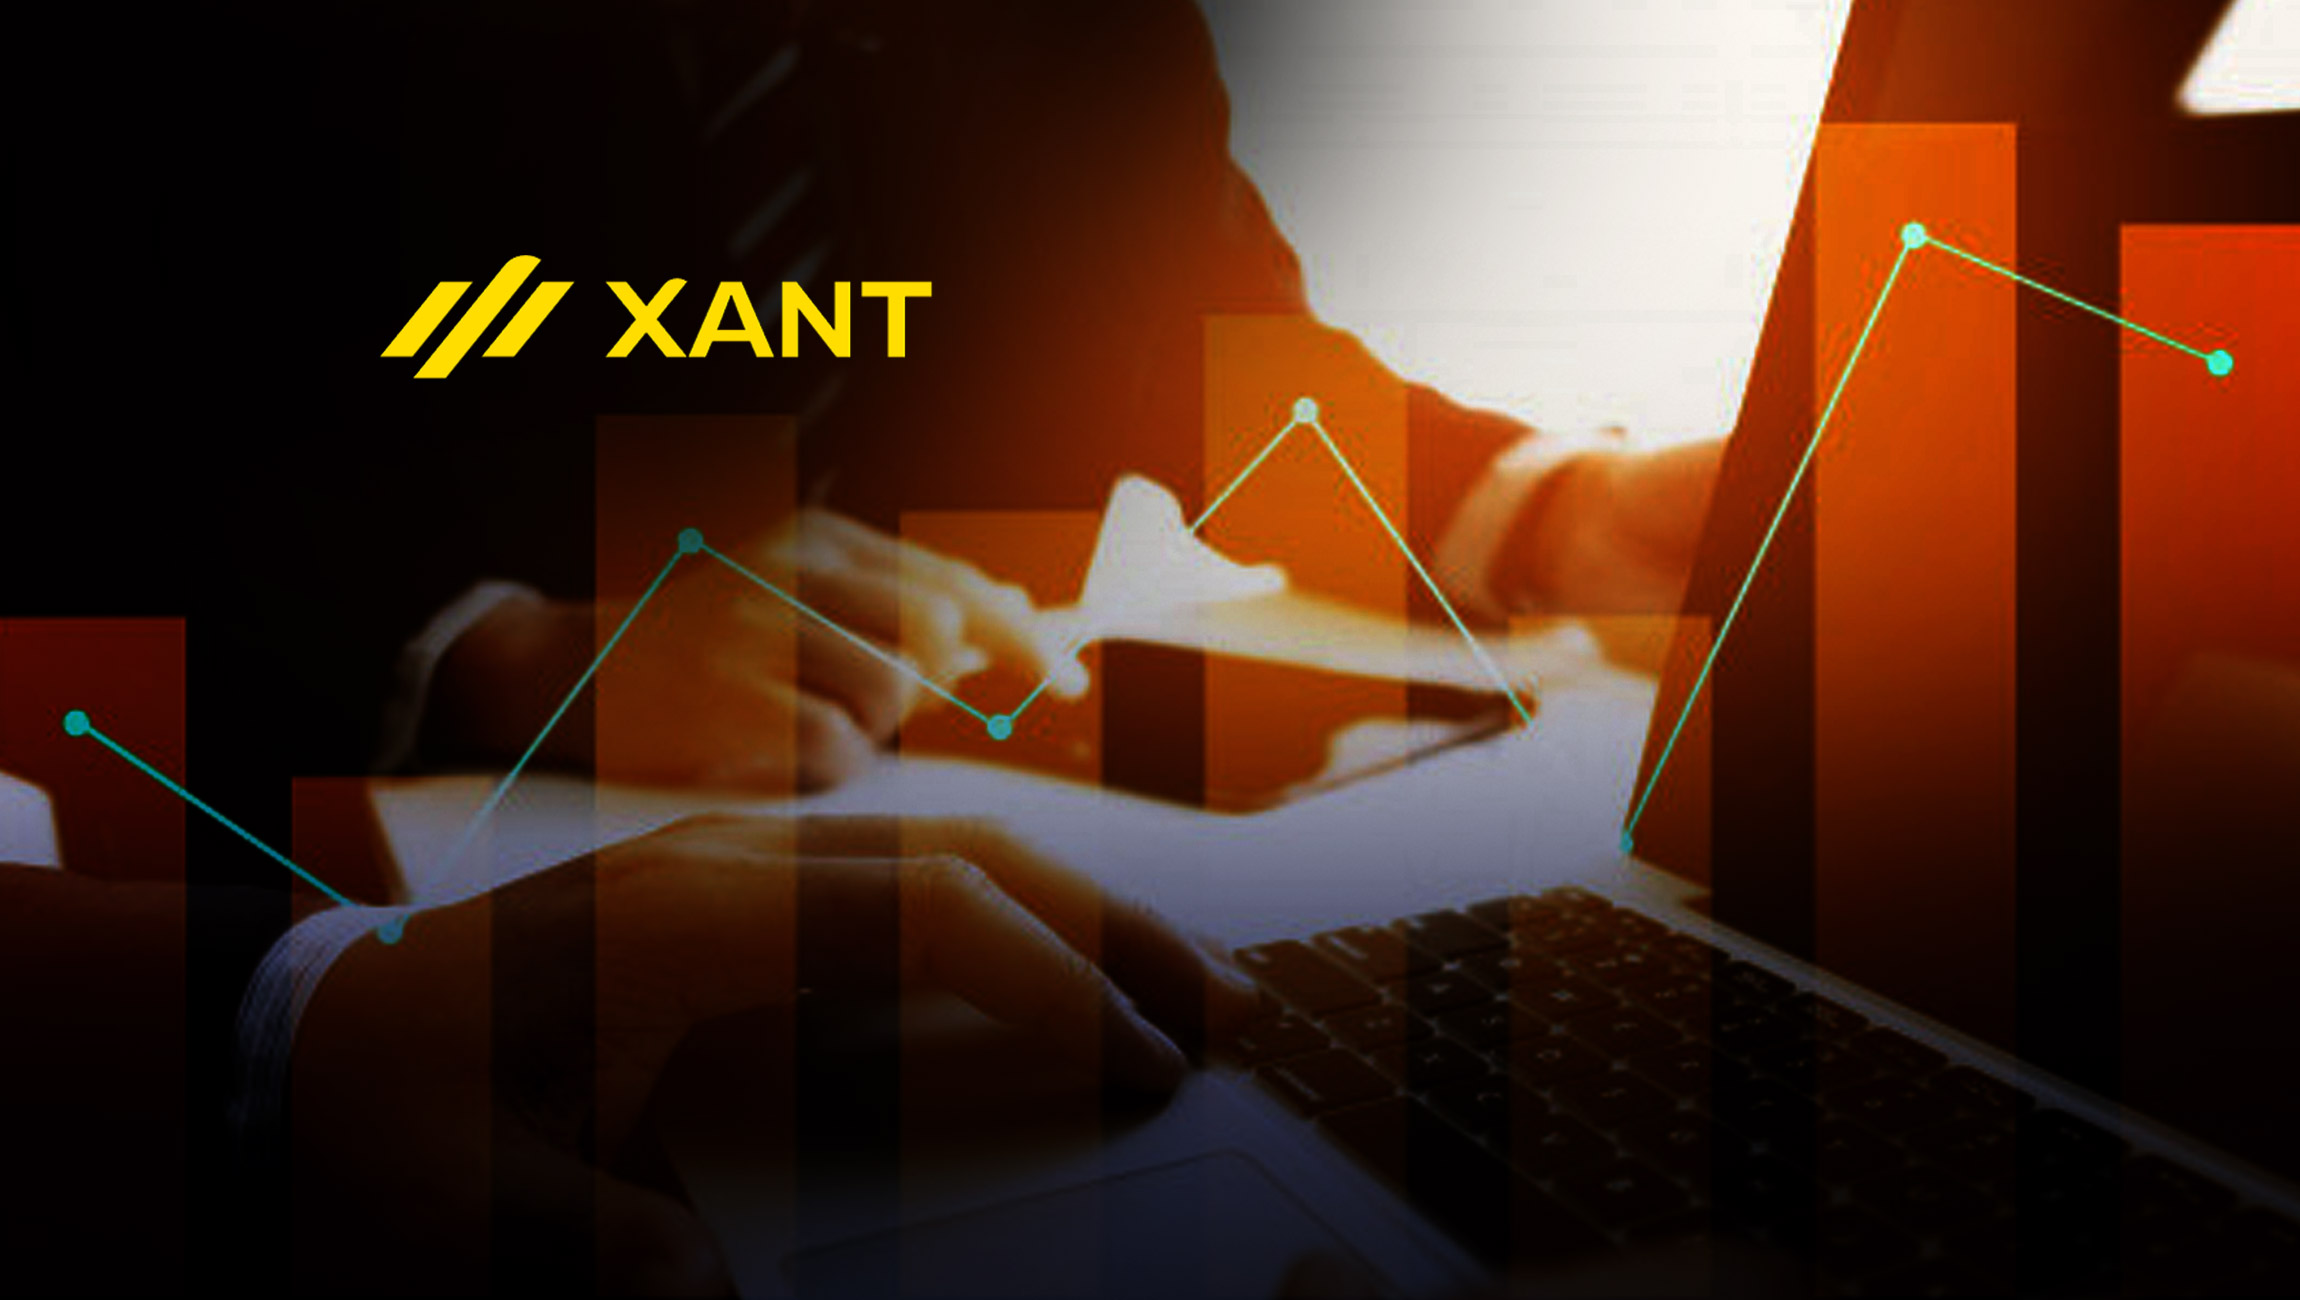 XANT Announces PeopleFinder, a New Buyer IntelligenceFeature That Recommends Additional Contacts in the Buying Group